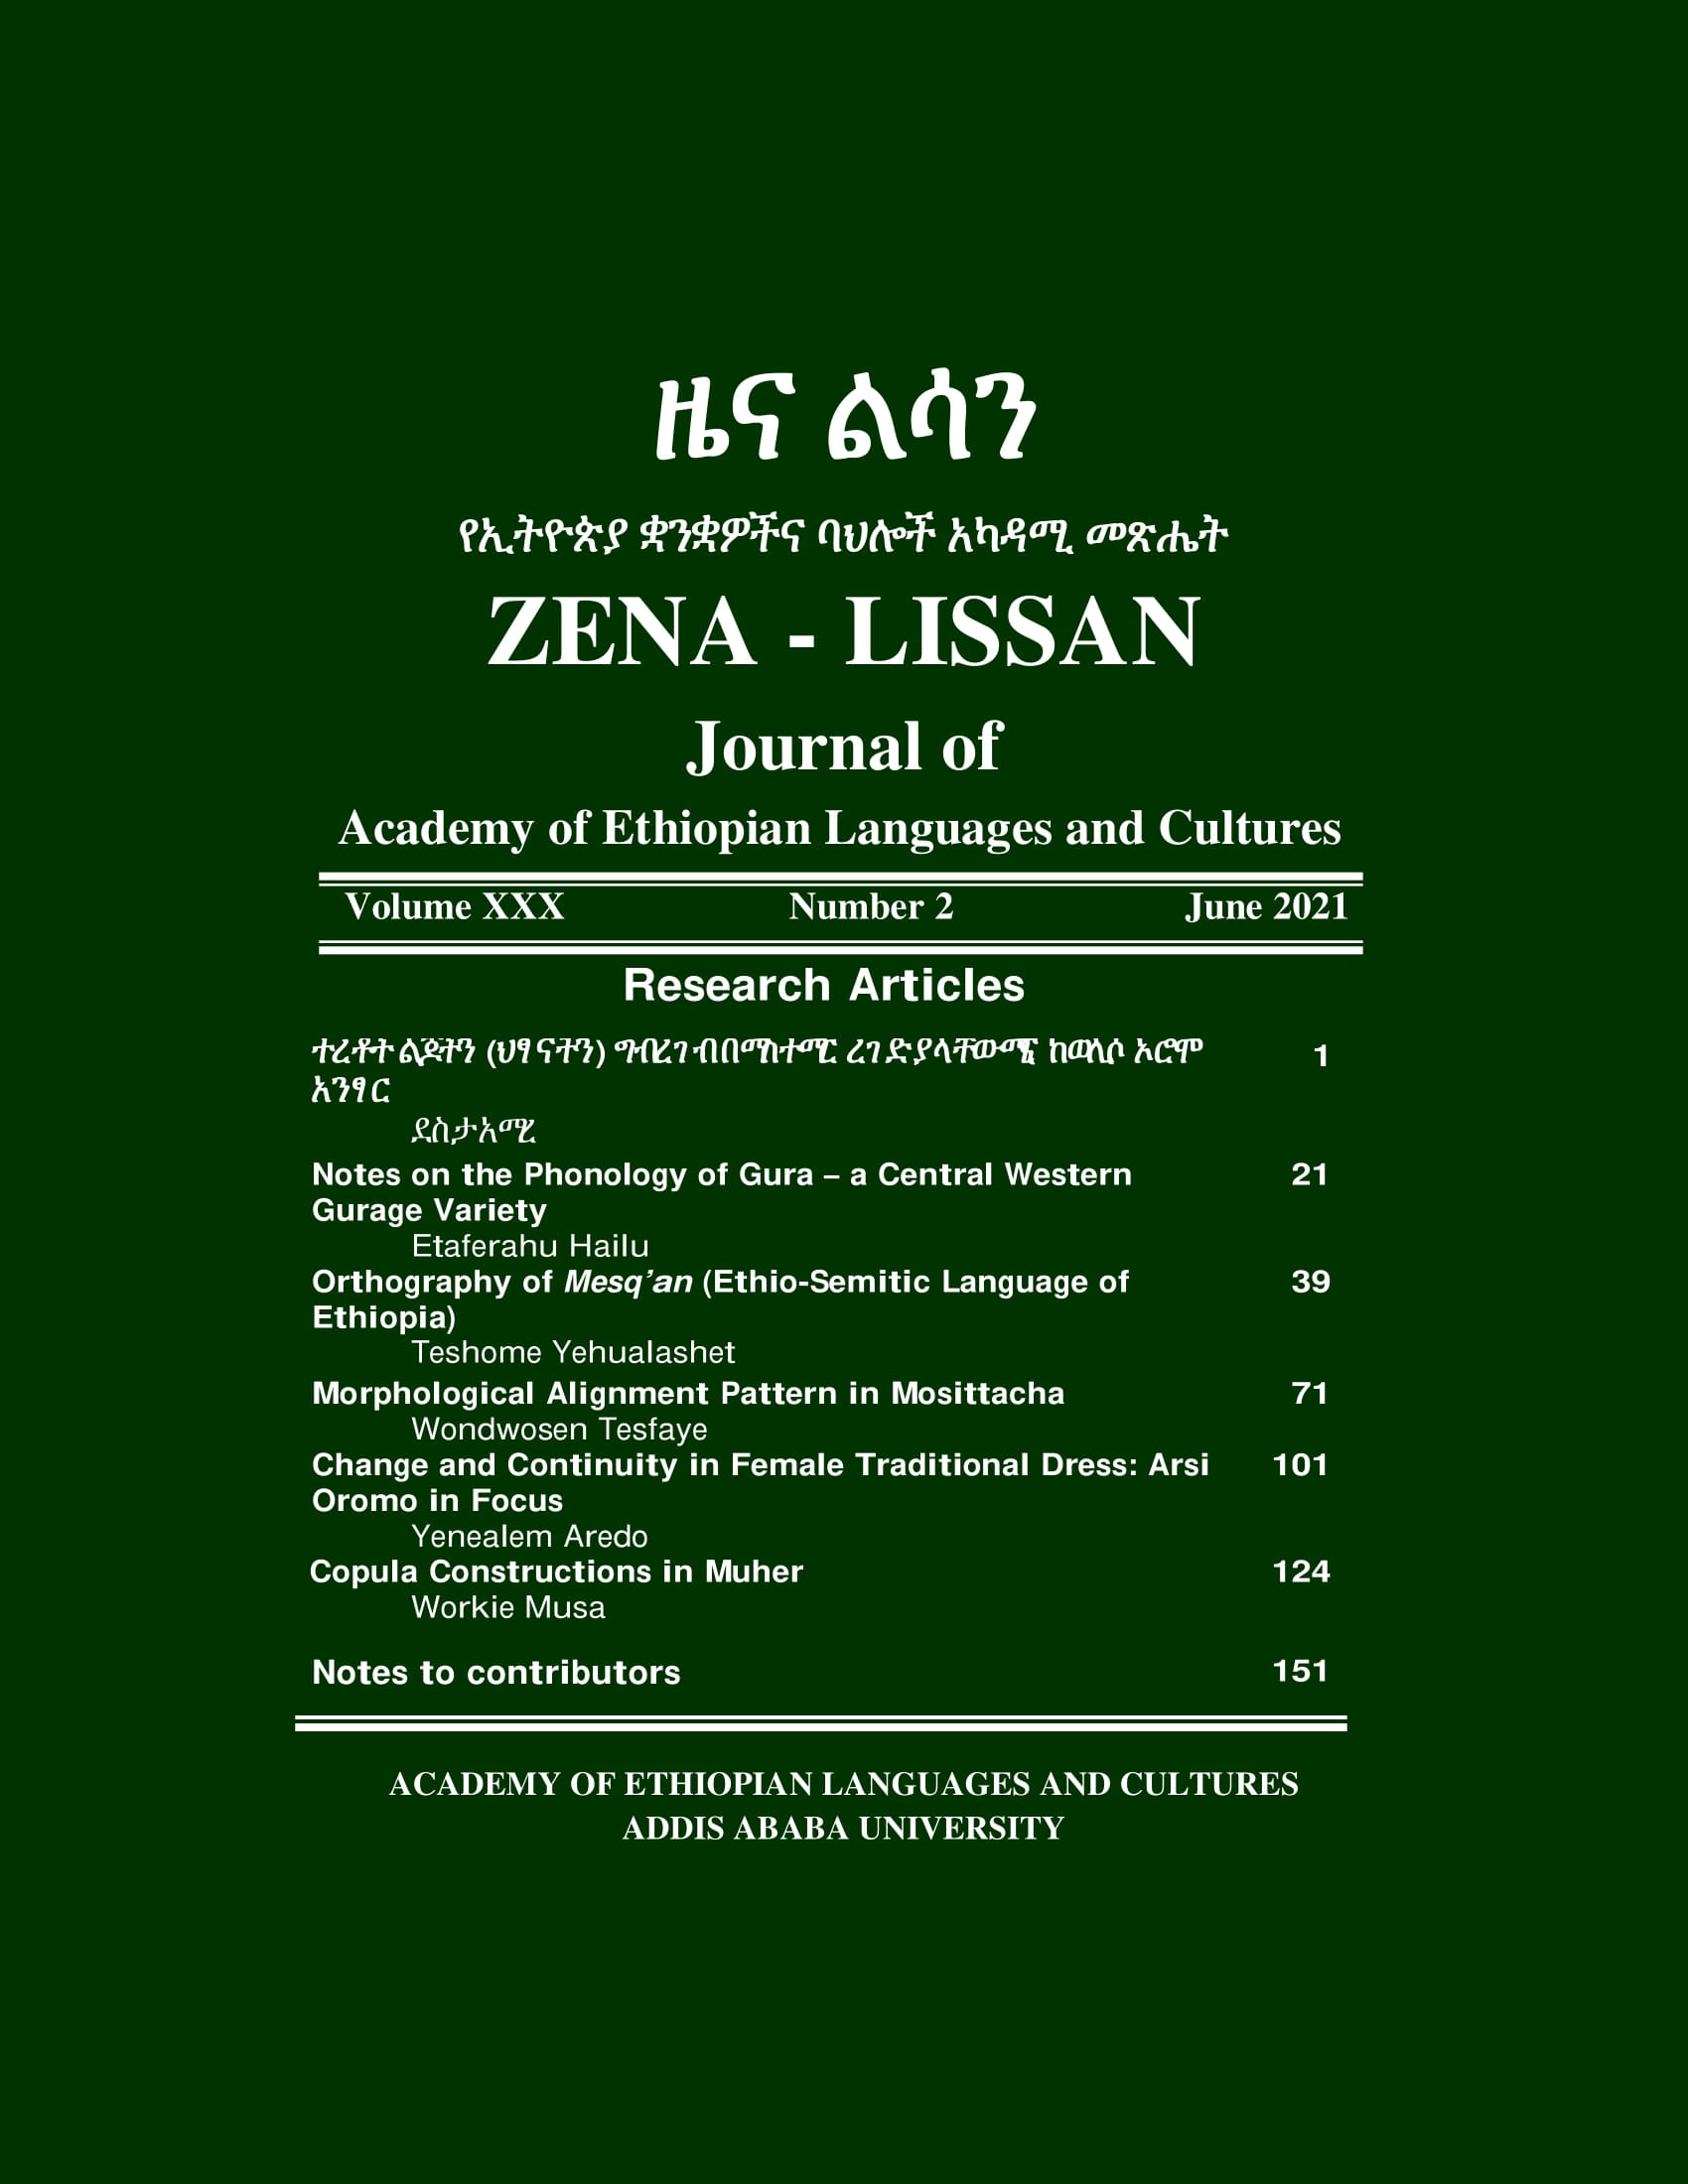 					View Vol. 30 No. 2 (2021): ZENA-LISSAN Journal of Ethiopian Languages and Cultures
				